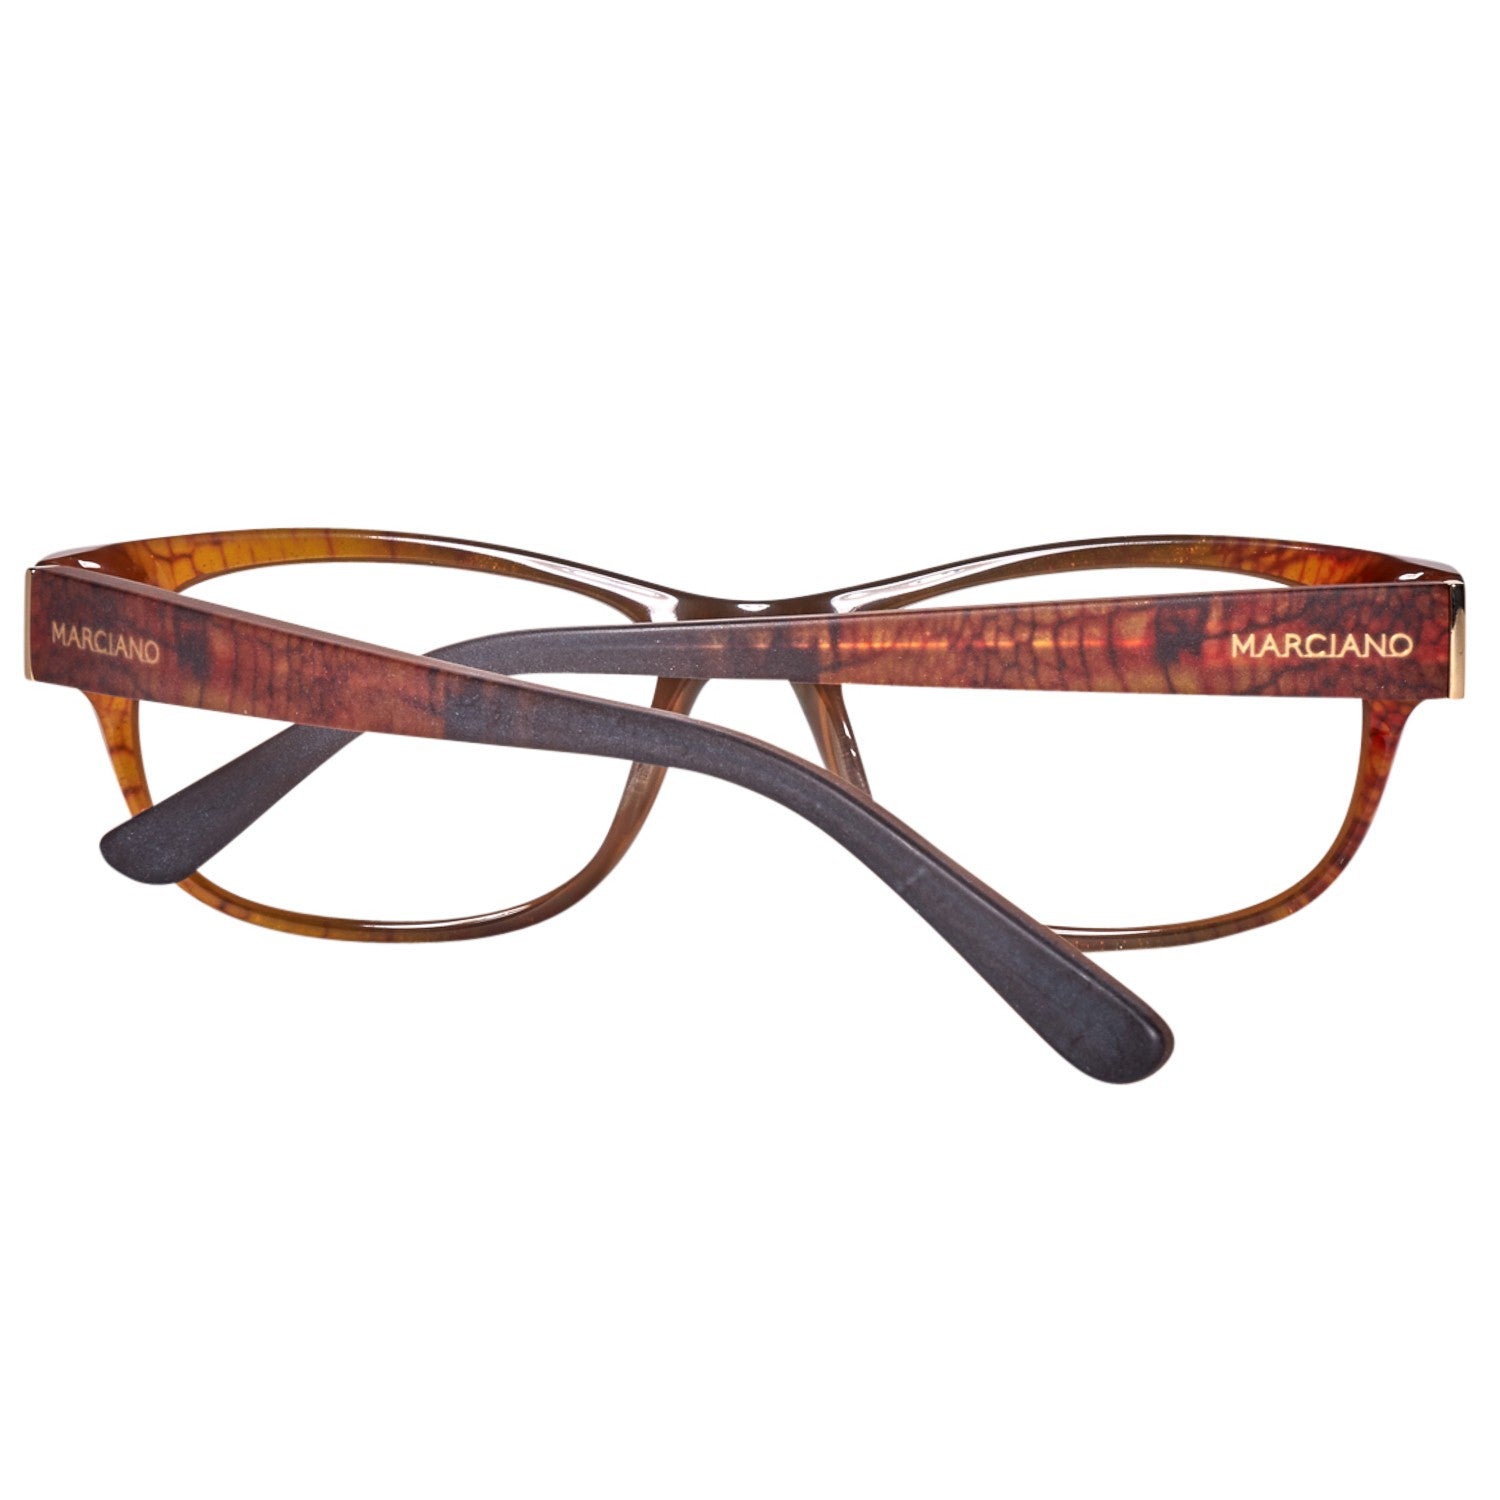 Marciano by Guess Frames Marciano by Guess Glasses Frames GM0261 050 53 Eyeglasses Eyewear UK USA Australia 